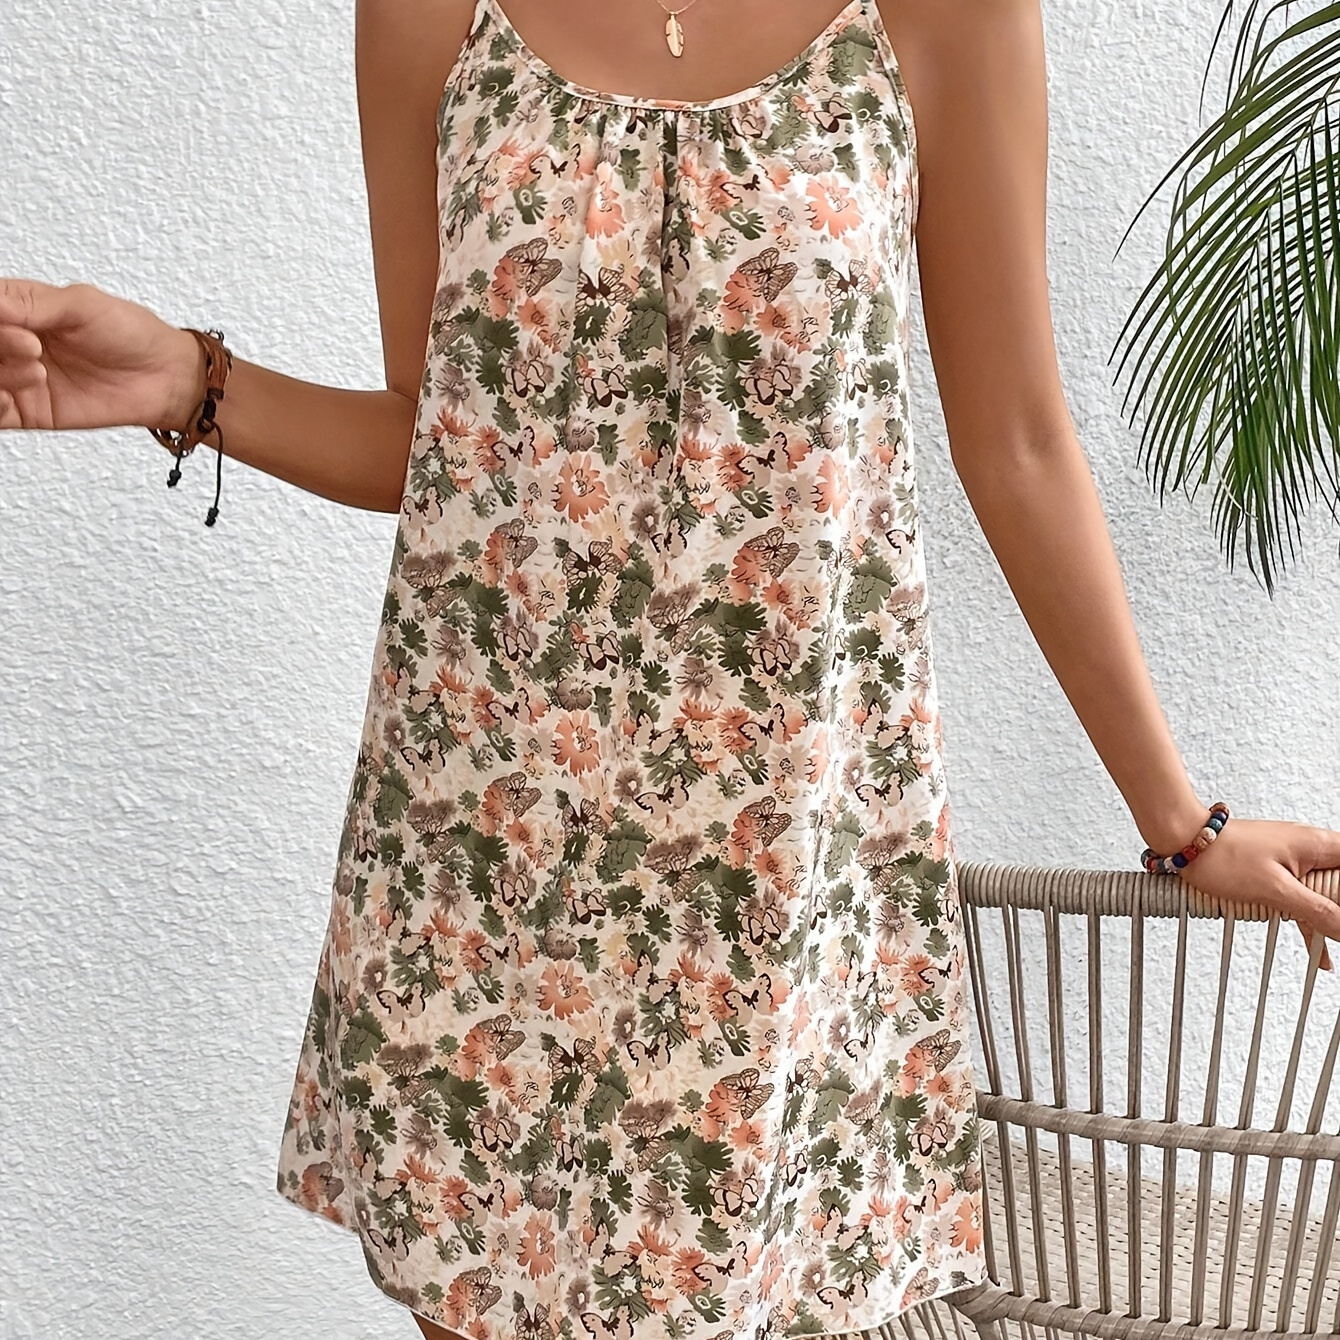 

Floral Print Cami Dress, Casual Sleeveless Dress For Summer Vacation, Women's Clothing